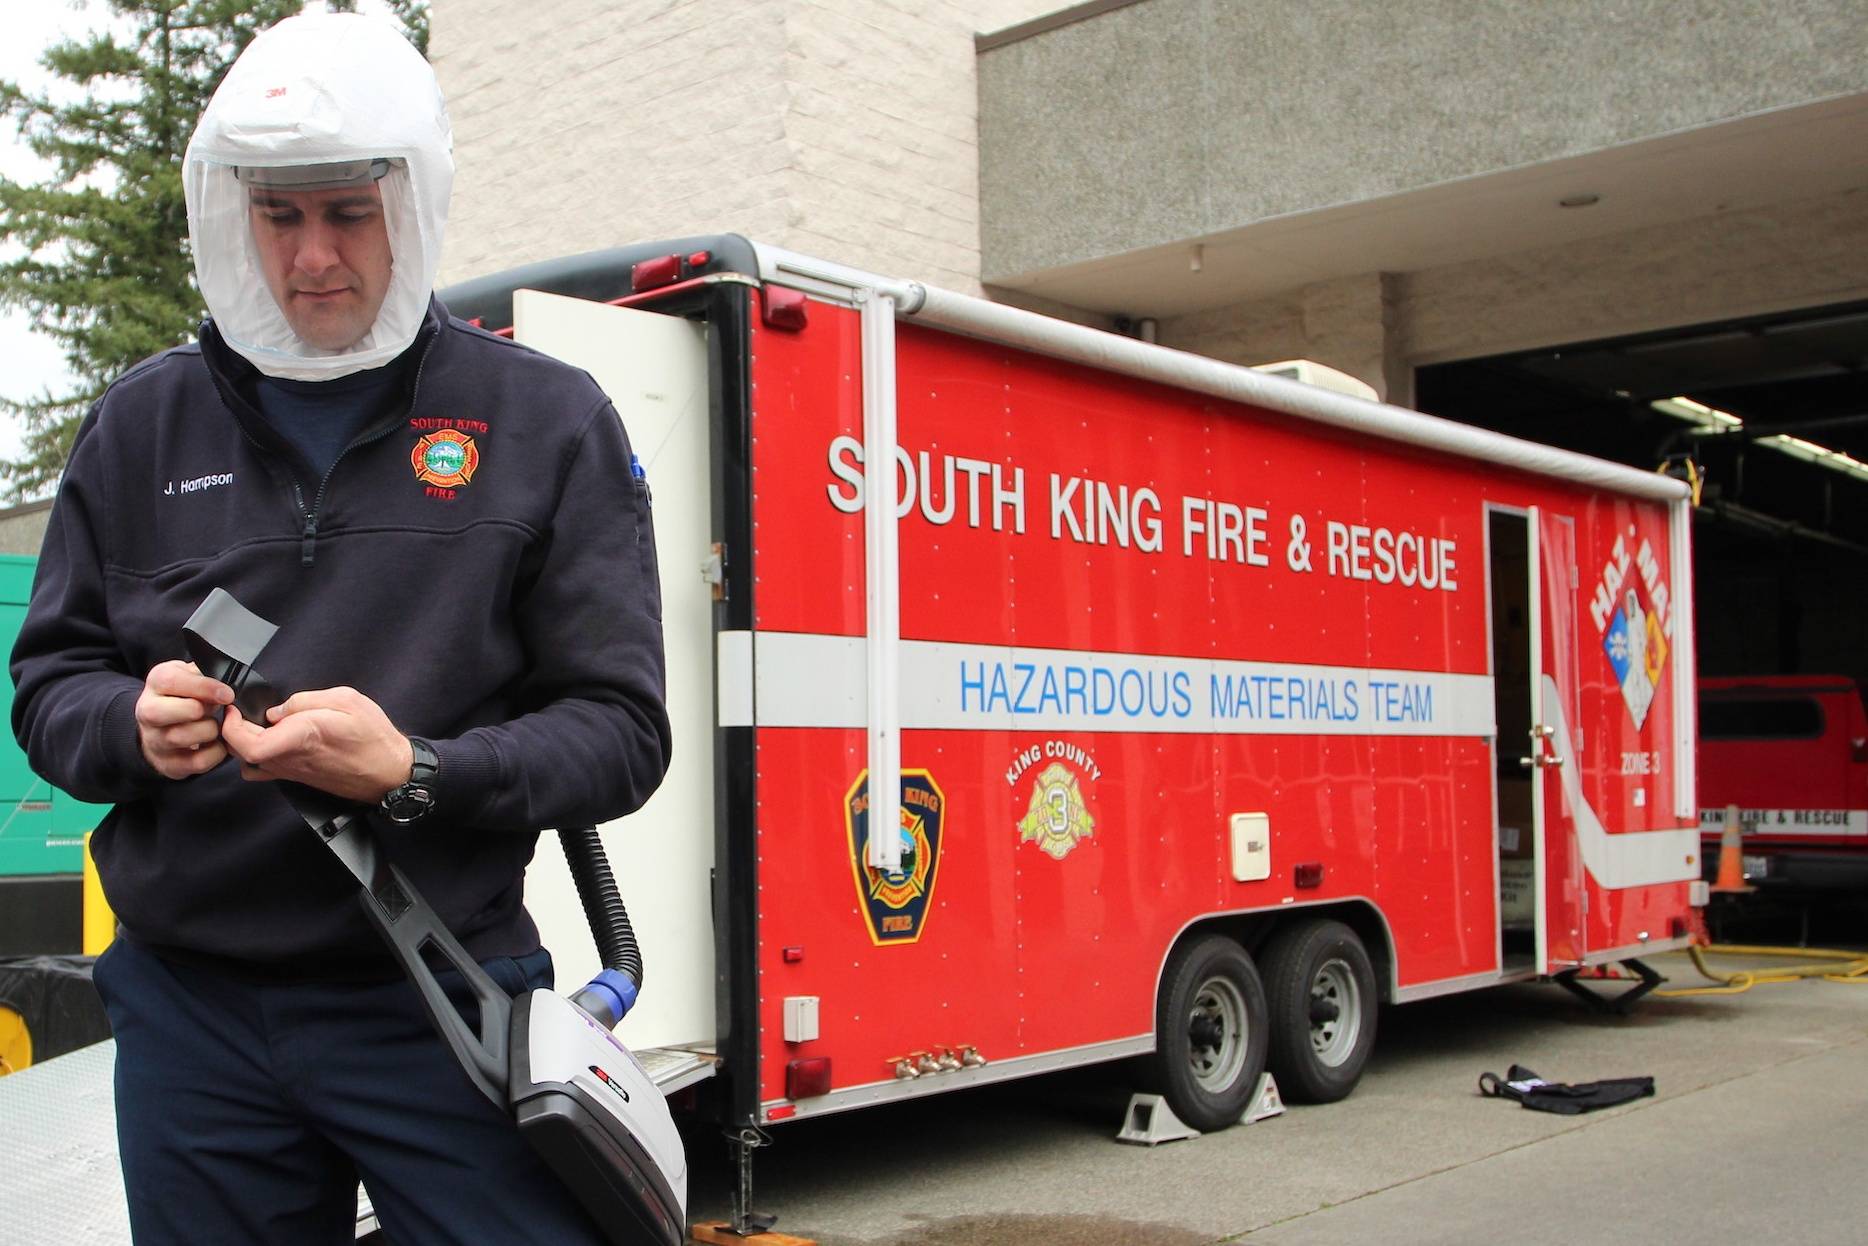 South King Fire opens county’s first decontamination site for law enforcement officers